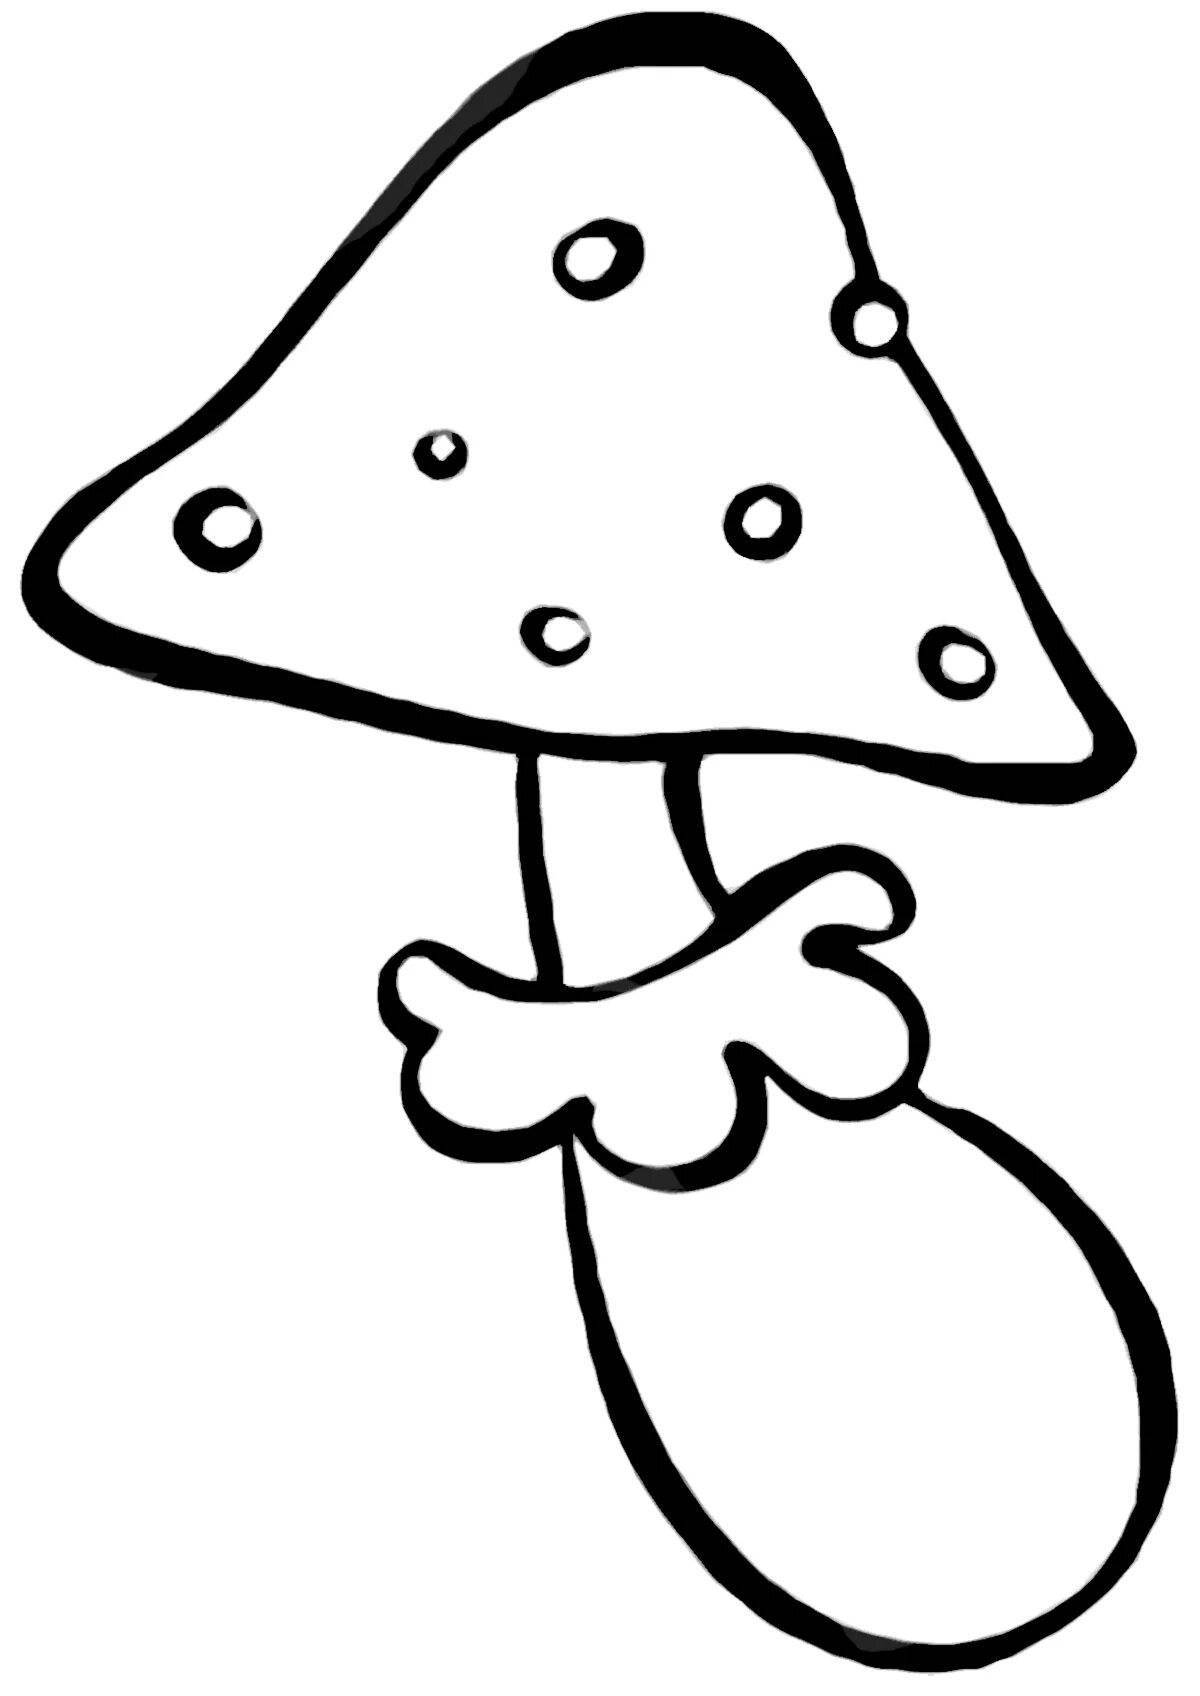 An alluring drawing of a mushroom fly agaric